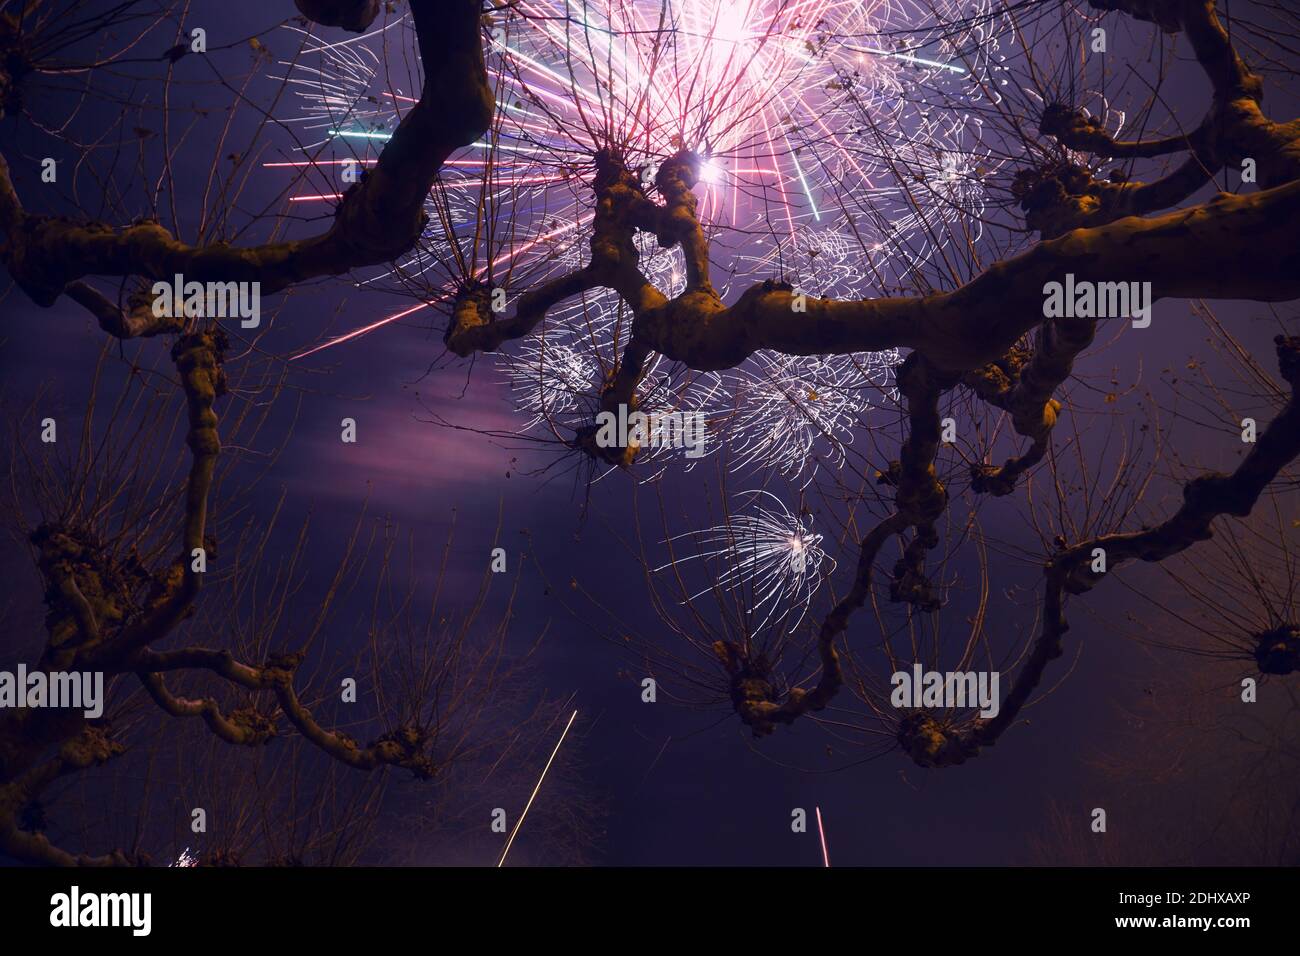 Plane trees with purple sky background and fireworks on New Year’s Eve in Düsseldorf, Germany. Stock Photo